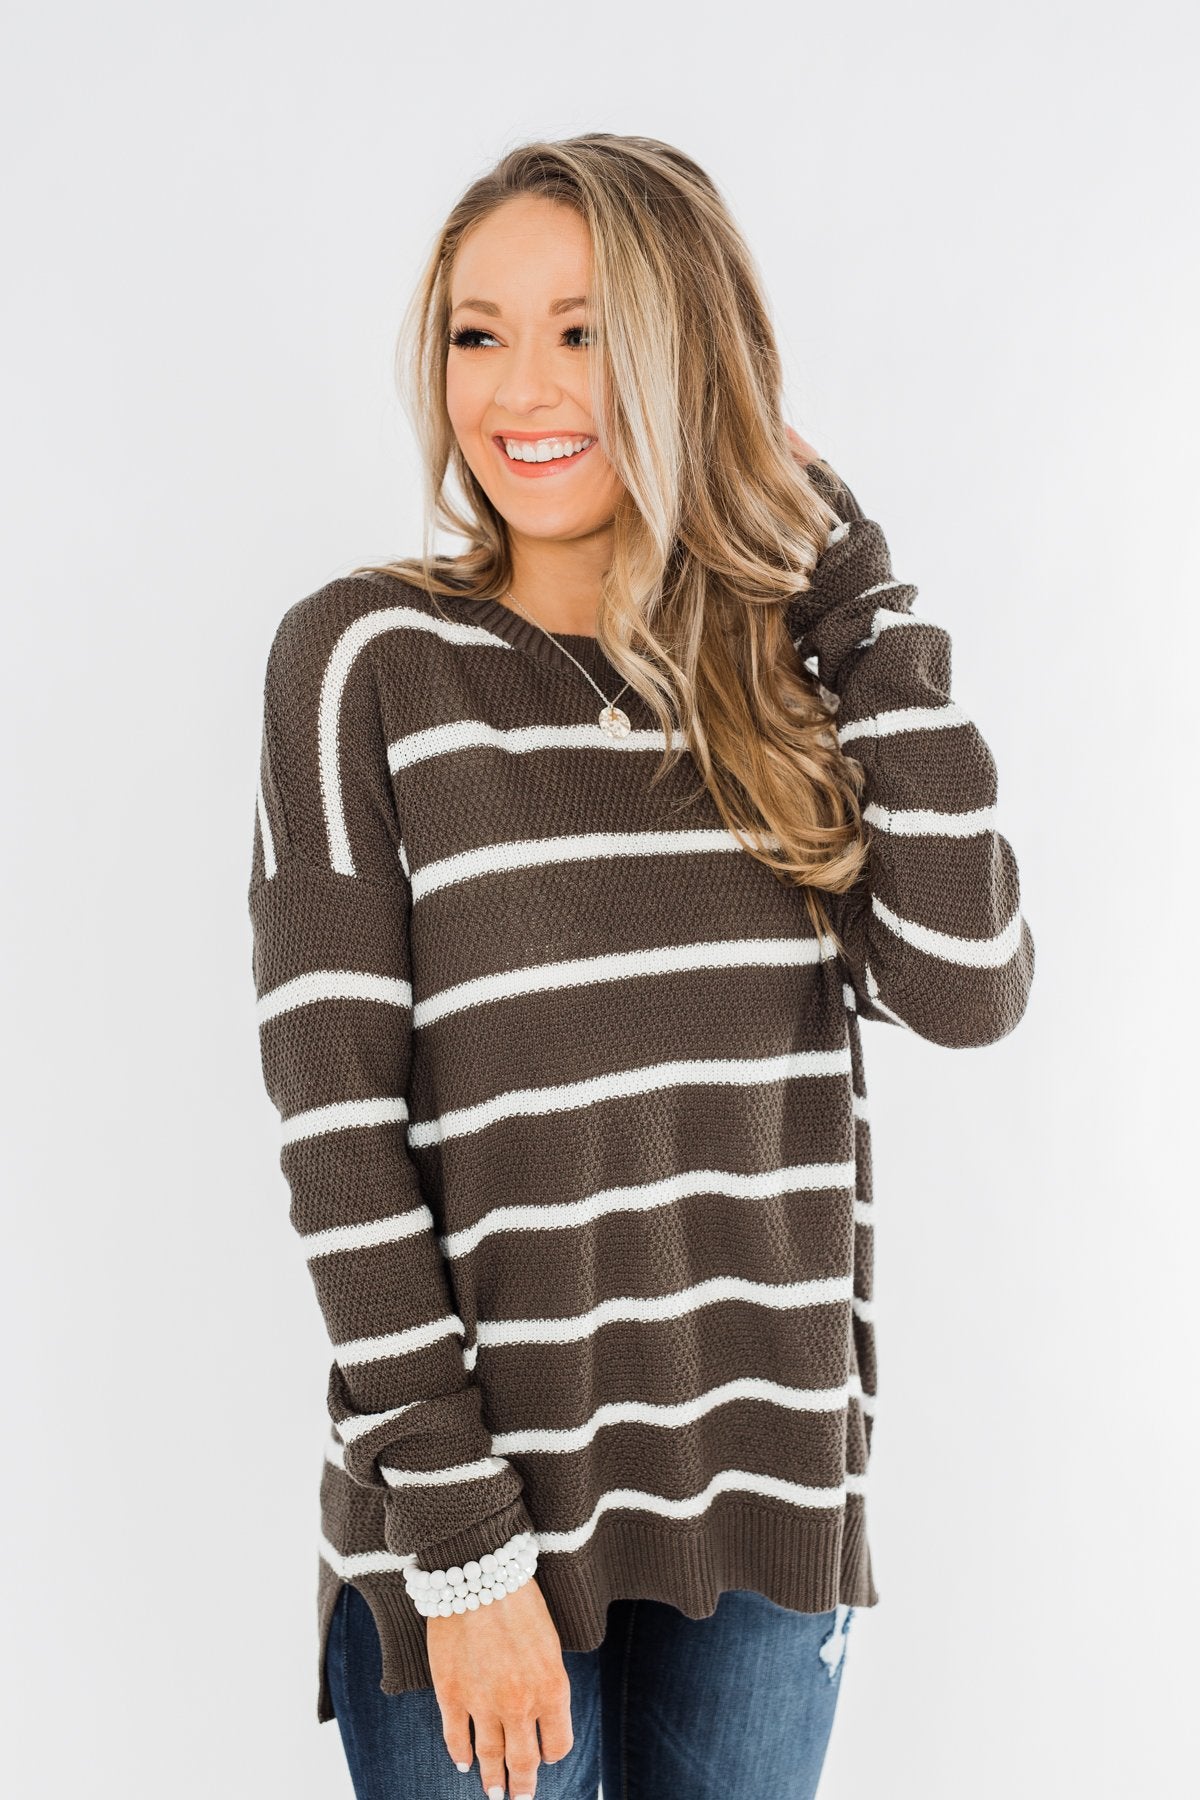 No Such Thing Striped Sweater- Charcoal Green – The Pulse Boutique